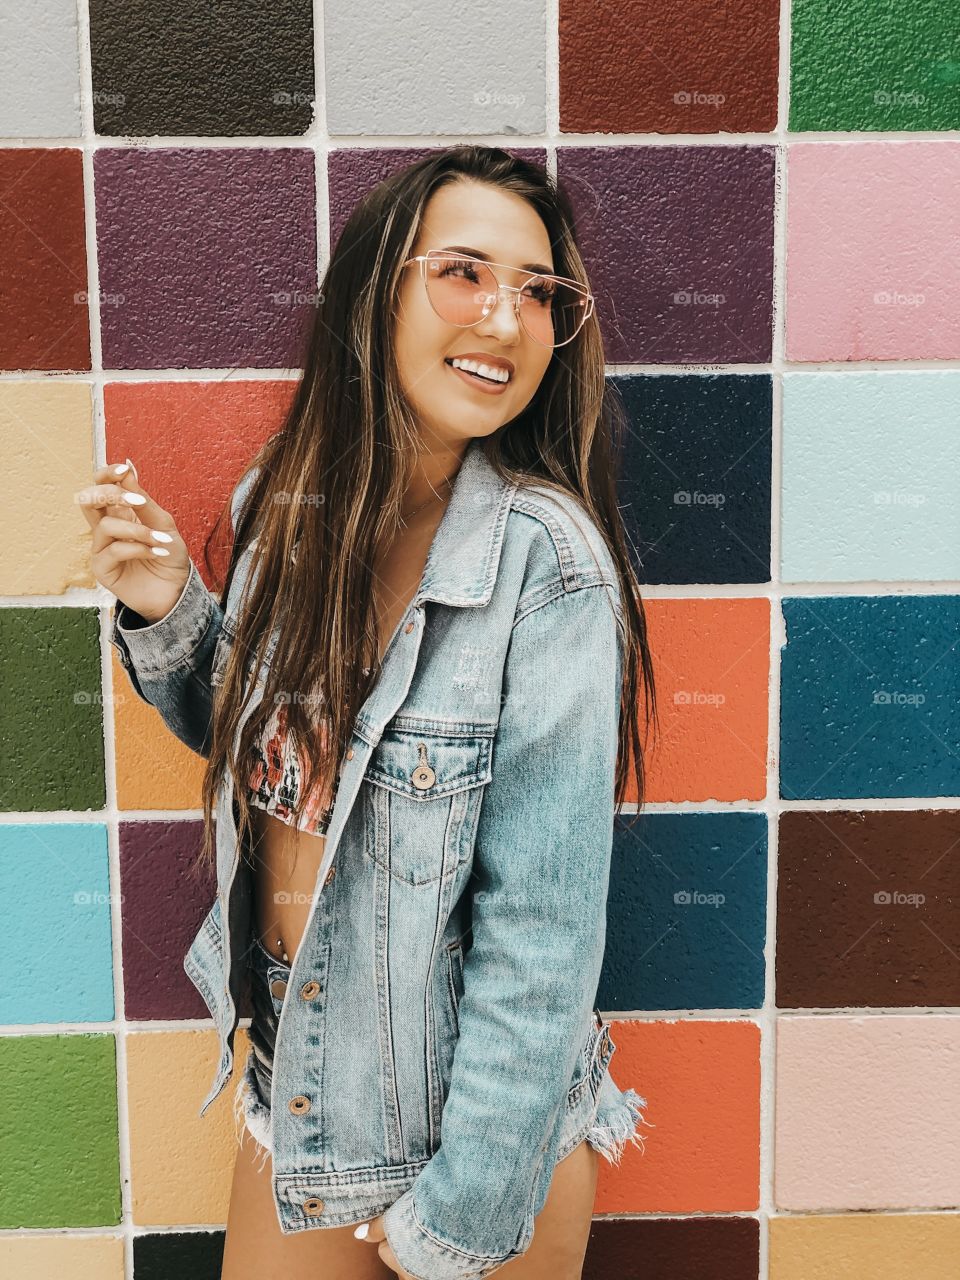 Pretty girl posing in front of a colorful art wall with her fun pink sunglasses.